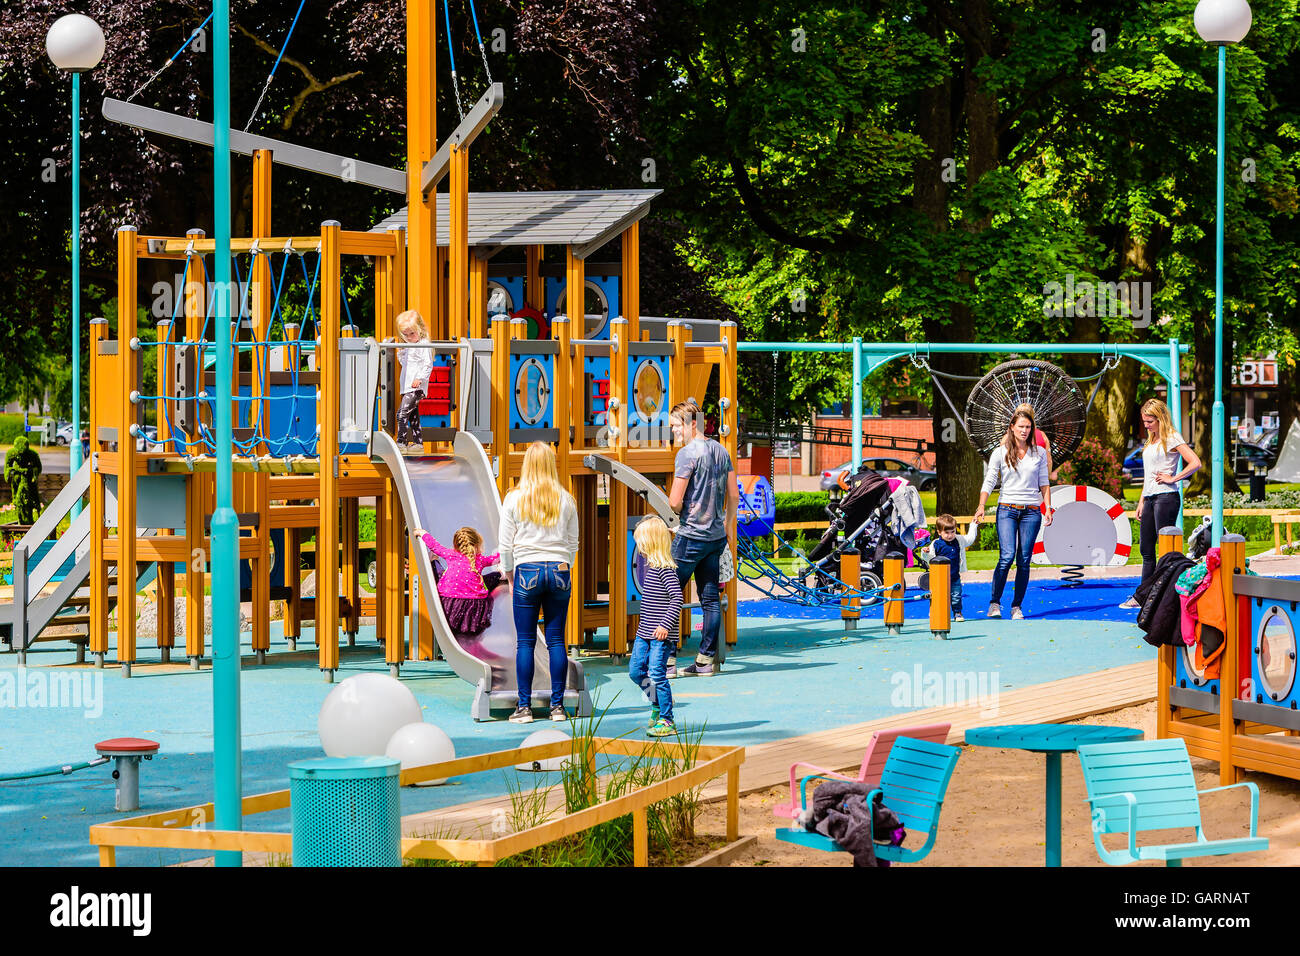 Motala, Sweden - June 21, 2016: Children and adults at a public playground in the city. Real life situation. Stock Photo